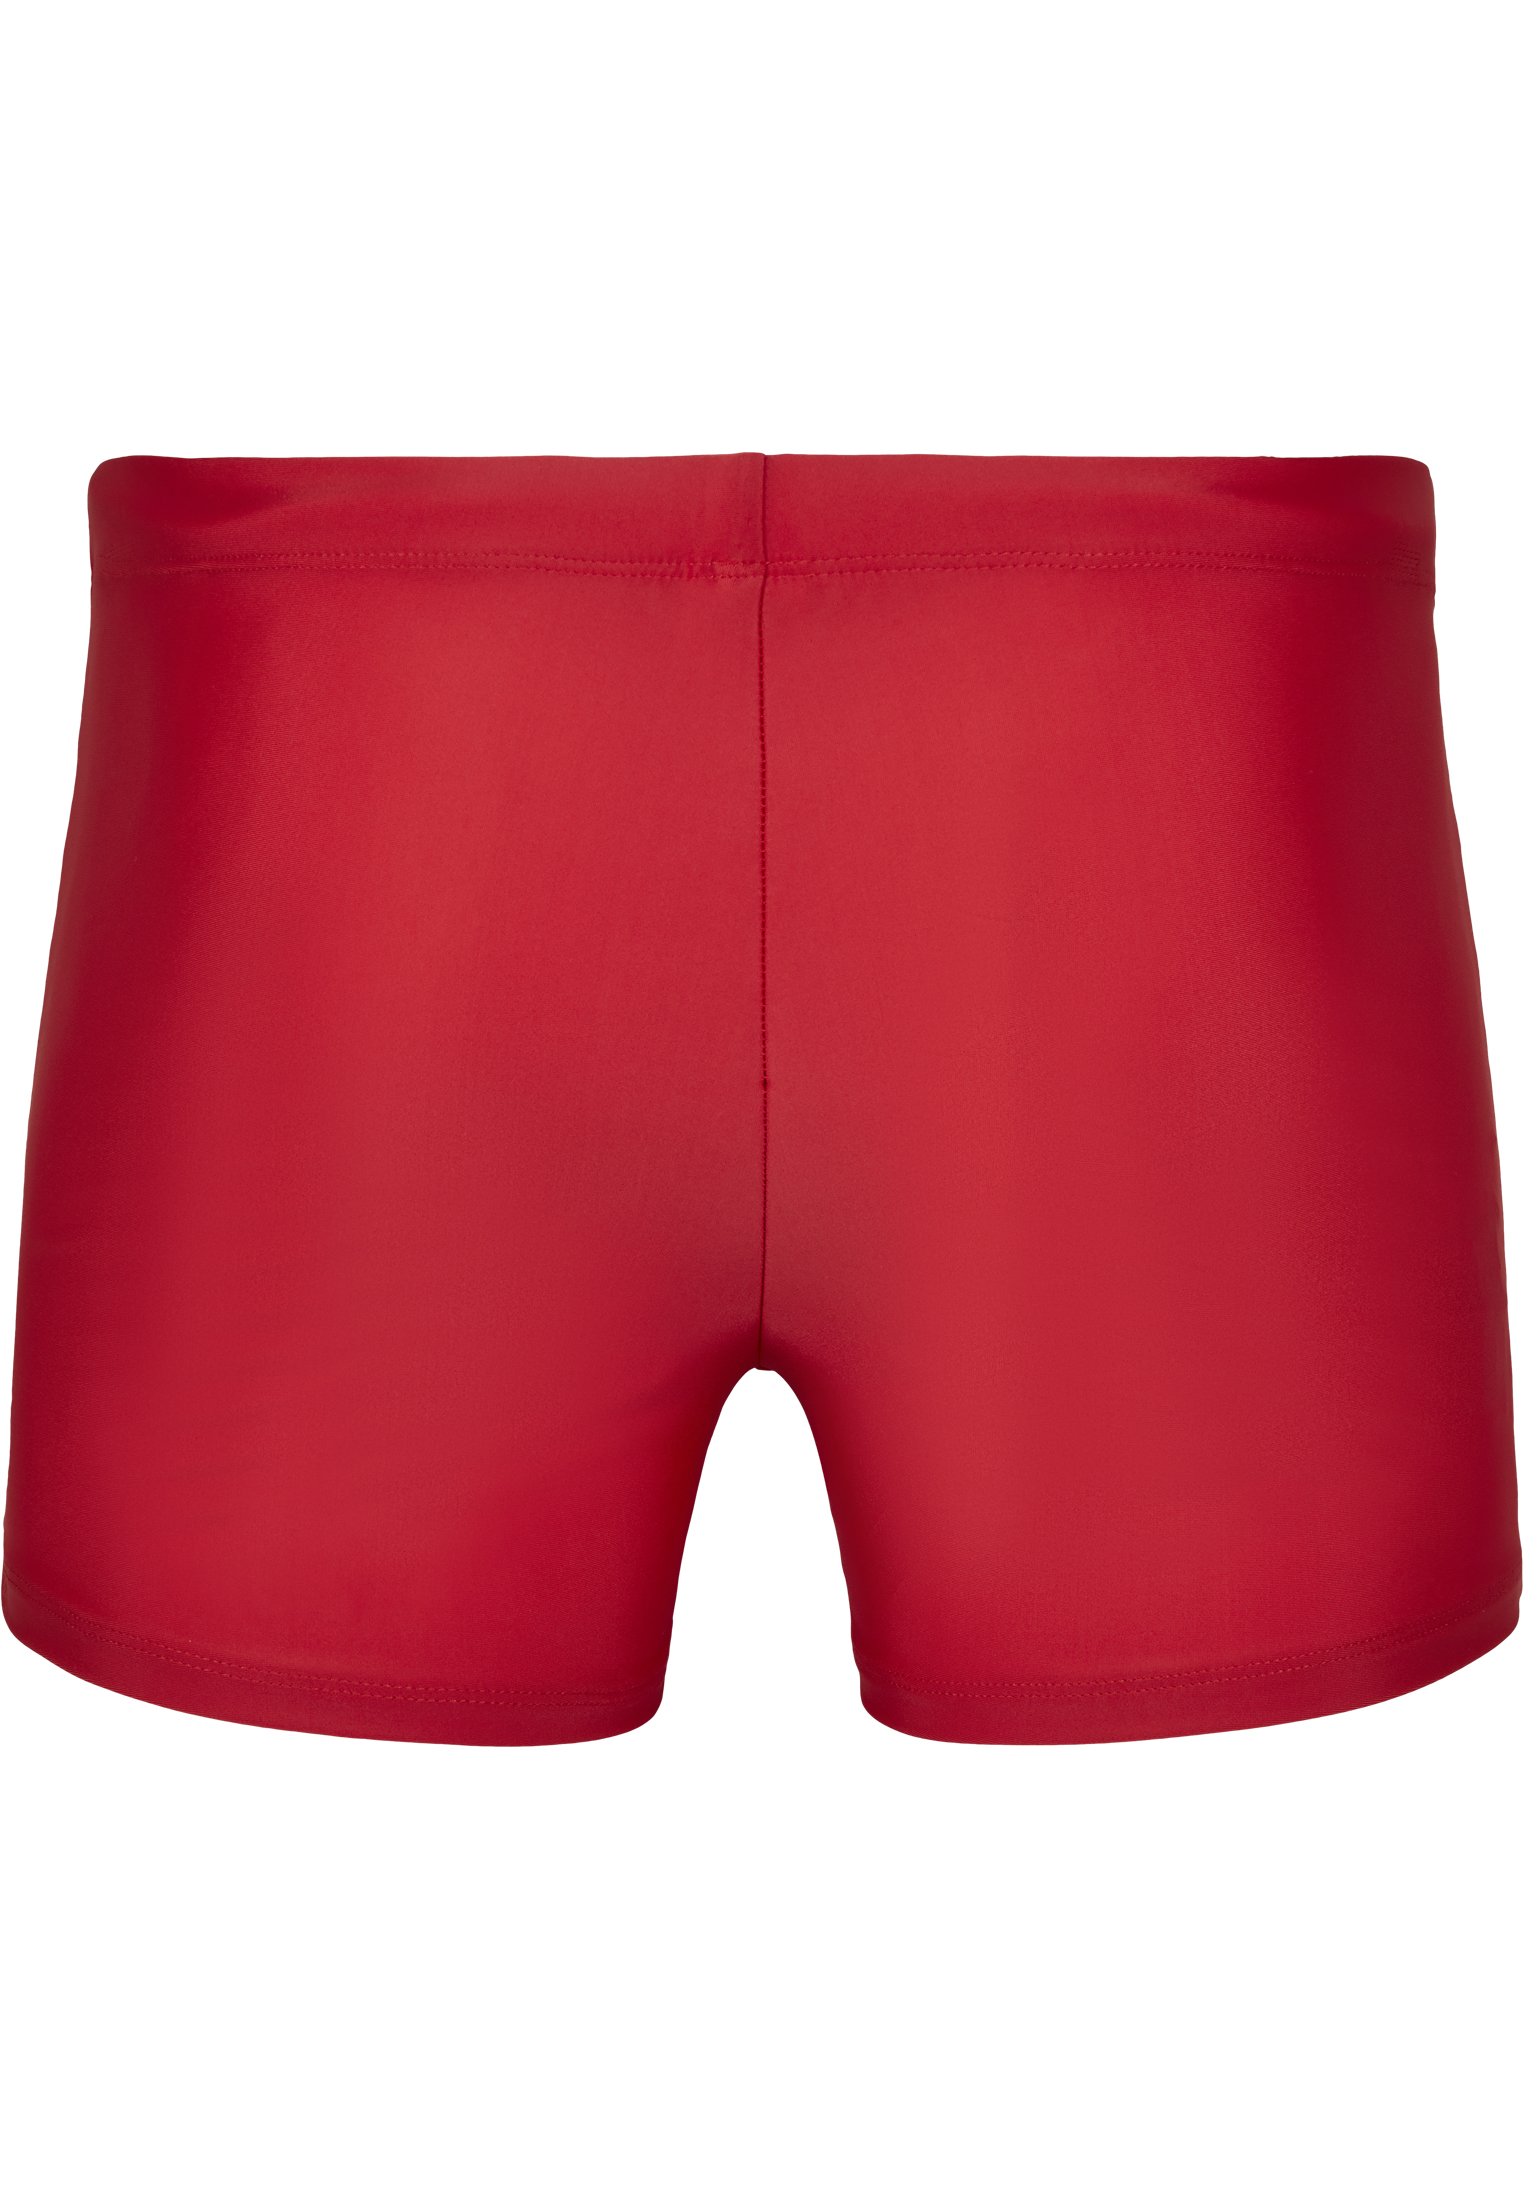 Bademode Basic Swim Trunk in Farbe fire red